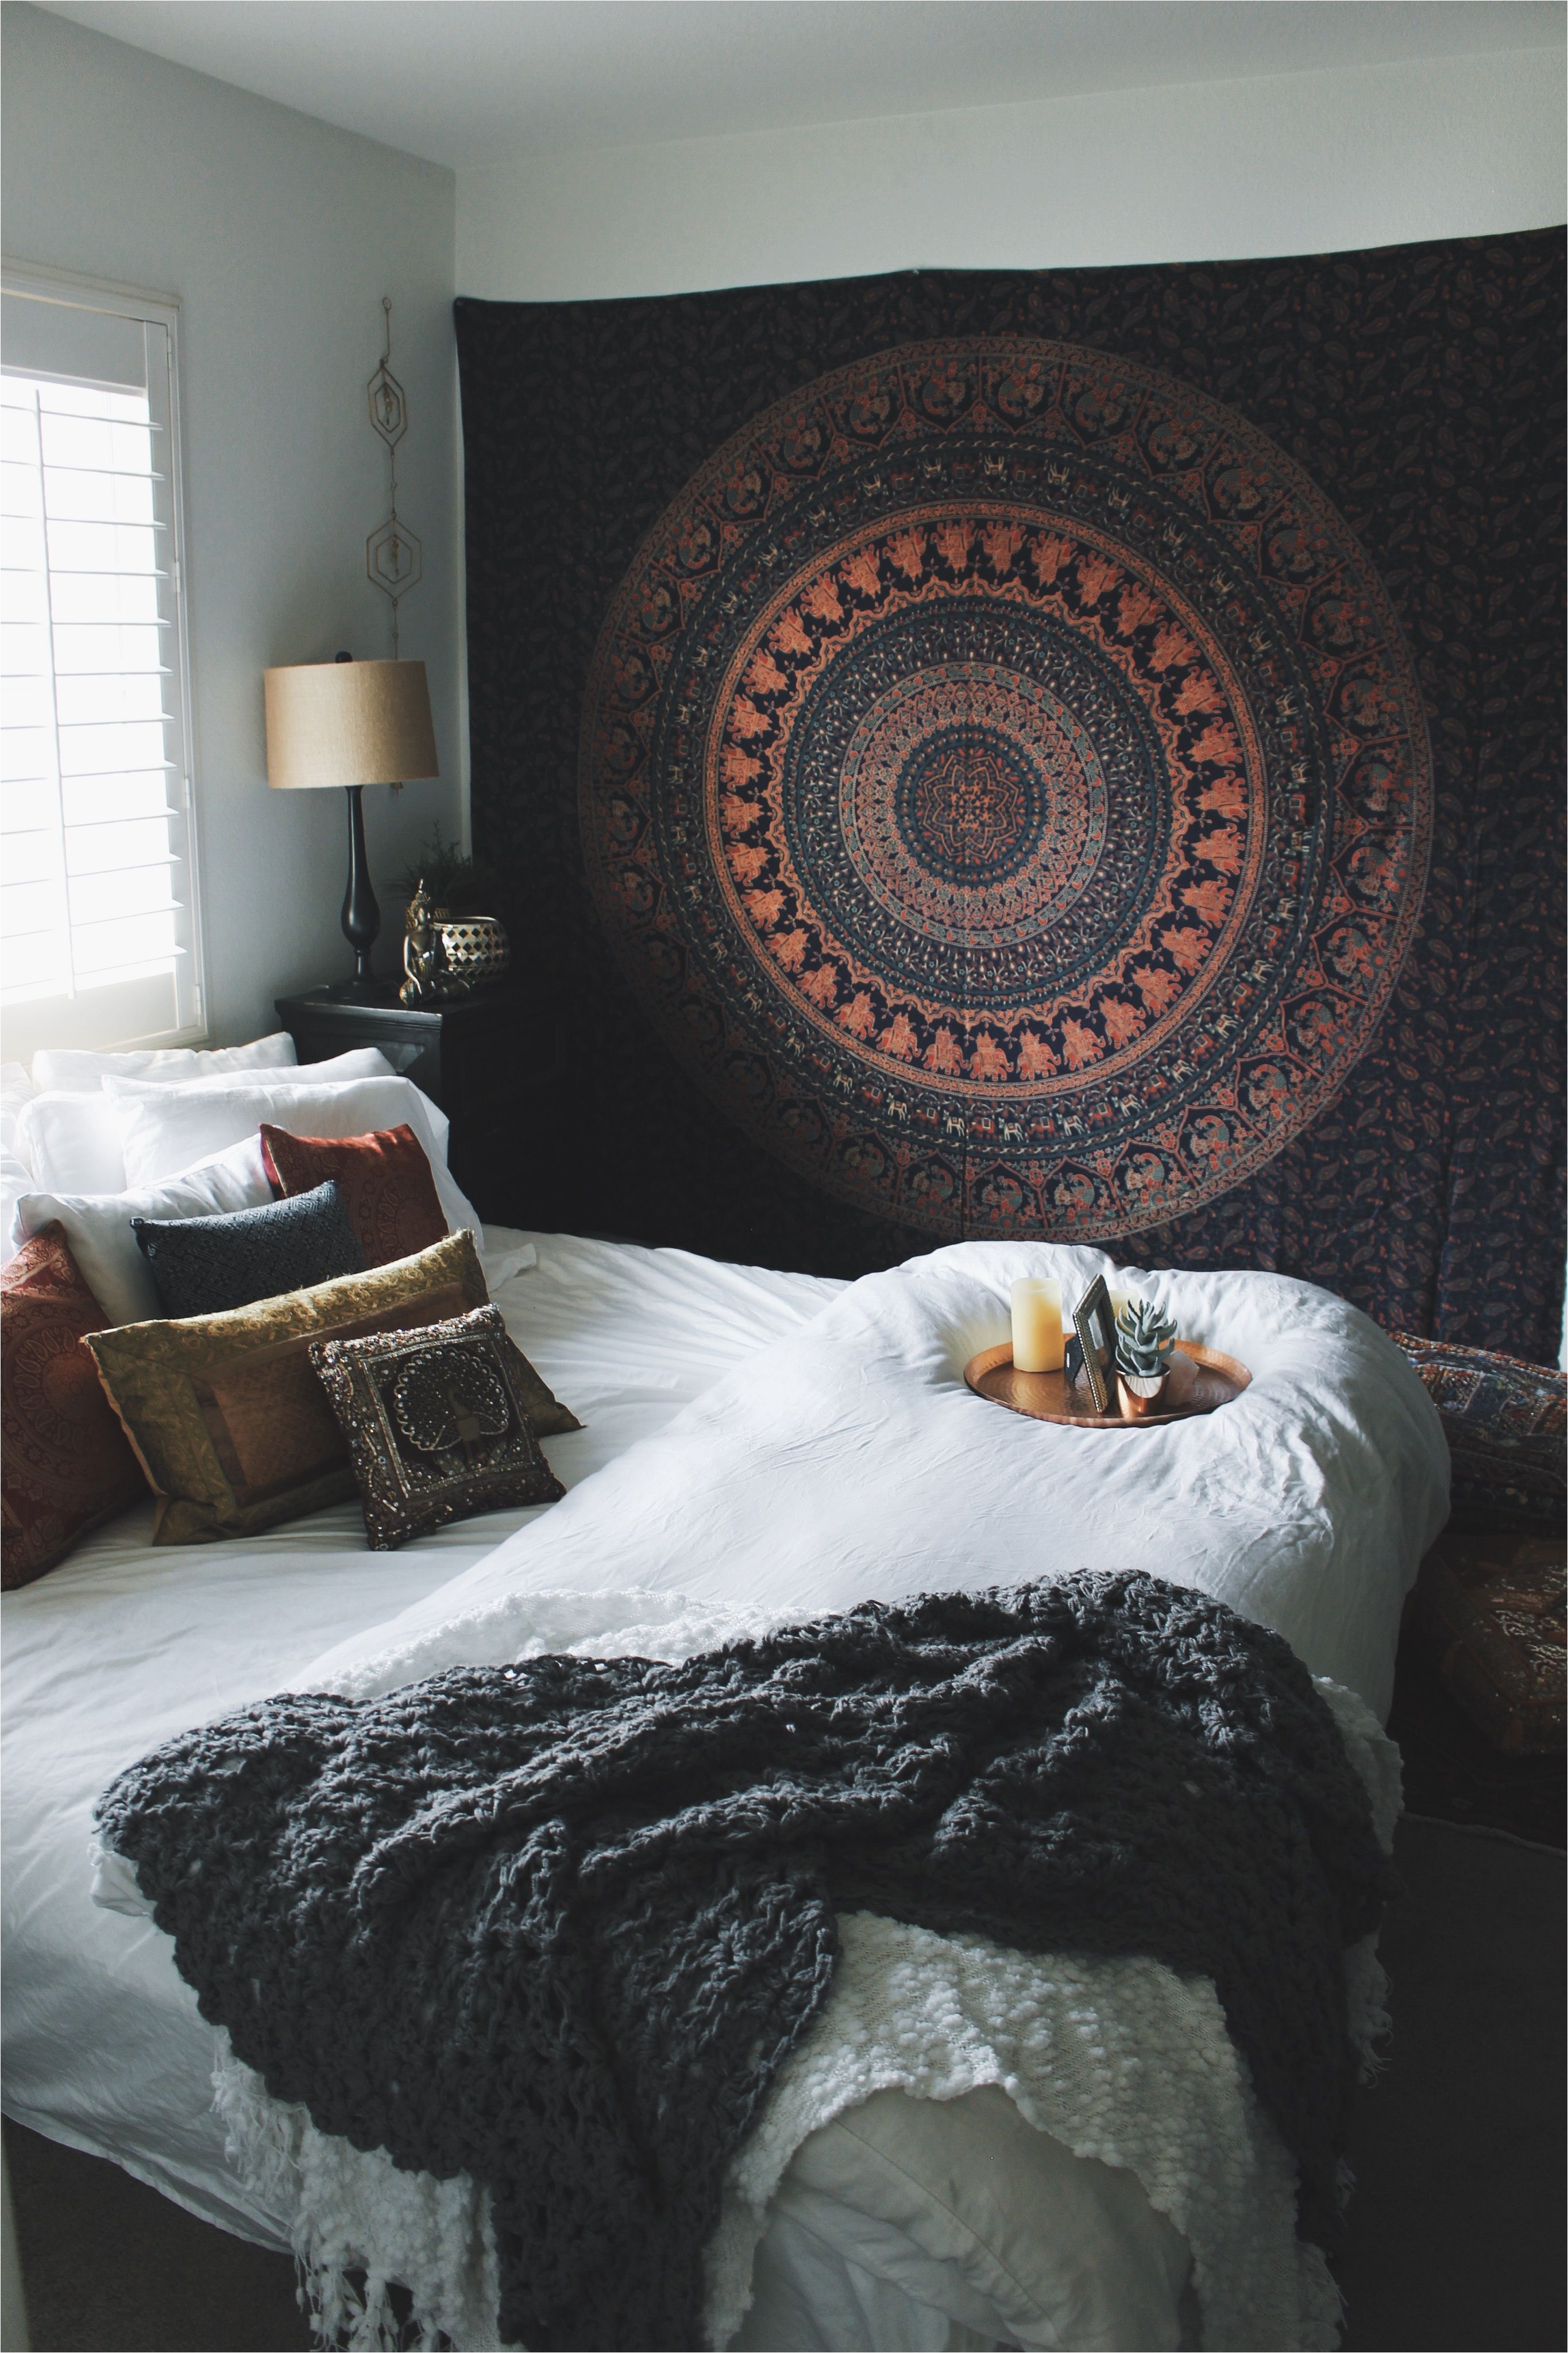 every lady scorpio mandala tapestry is designed to create good vibes positive energy a tapestry is a heavier decorative textile created to be used as a